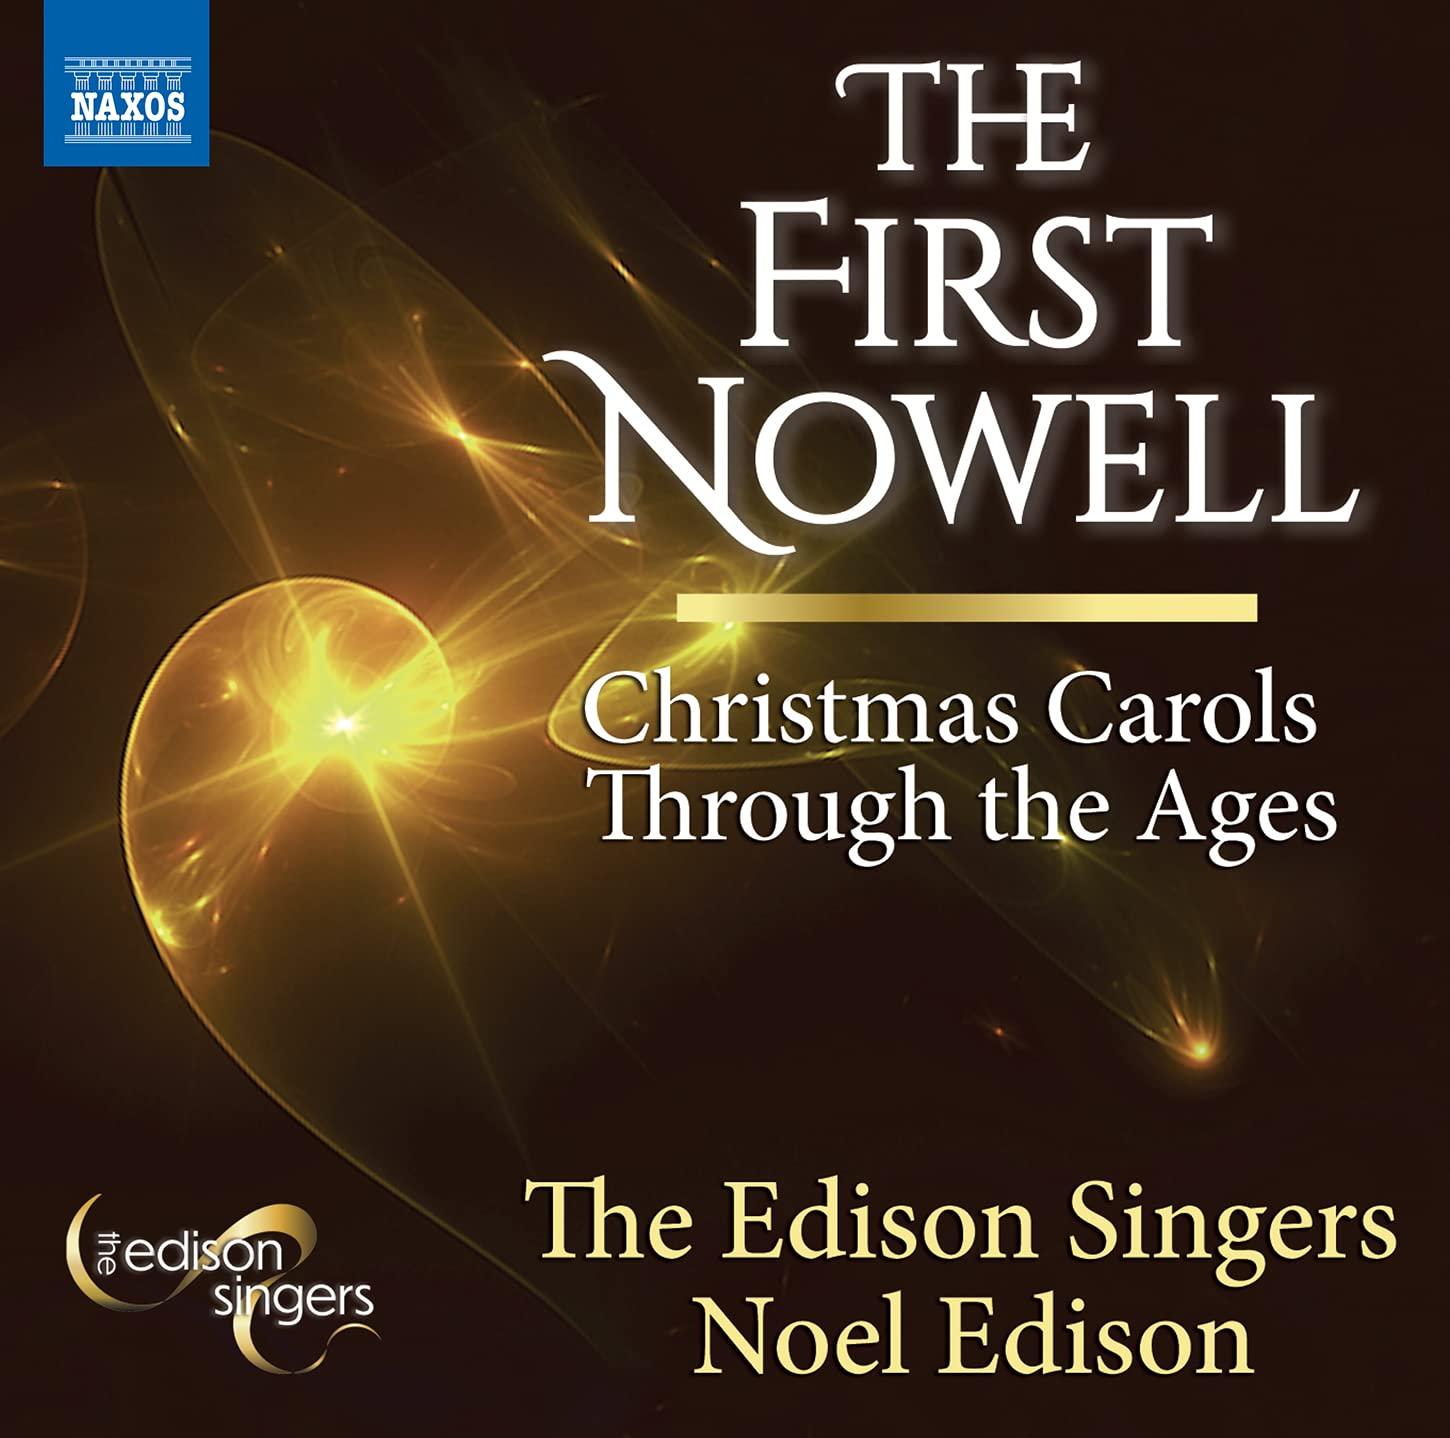 x mas 12 22 the first nowell